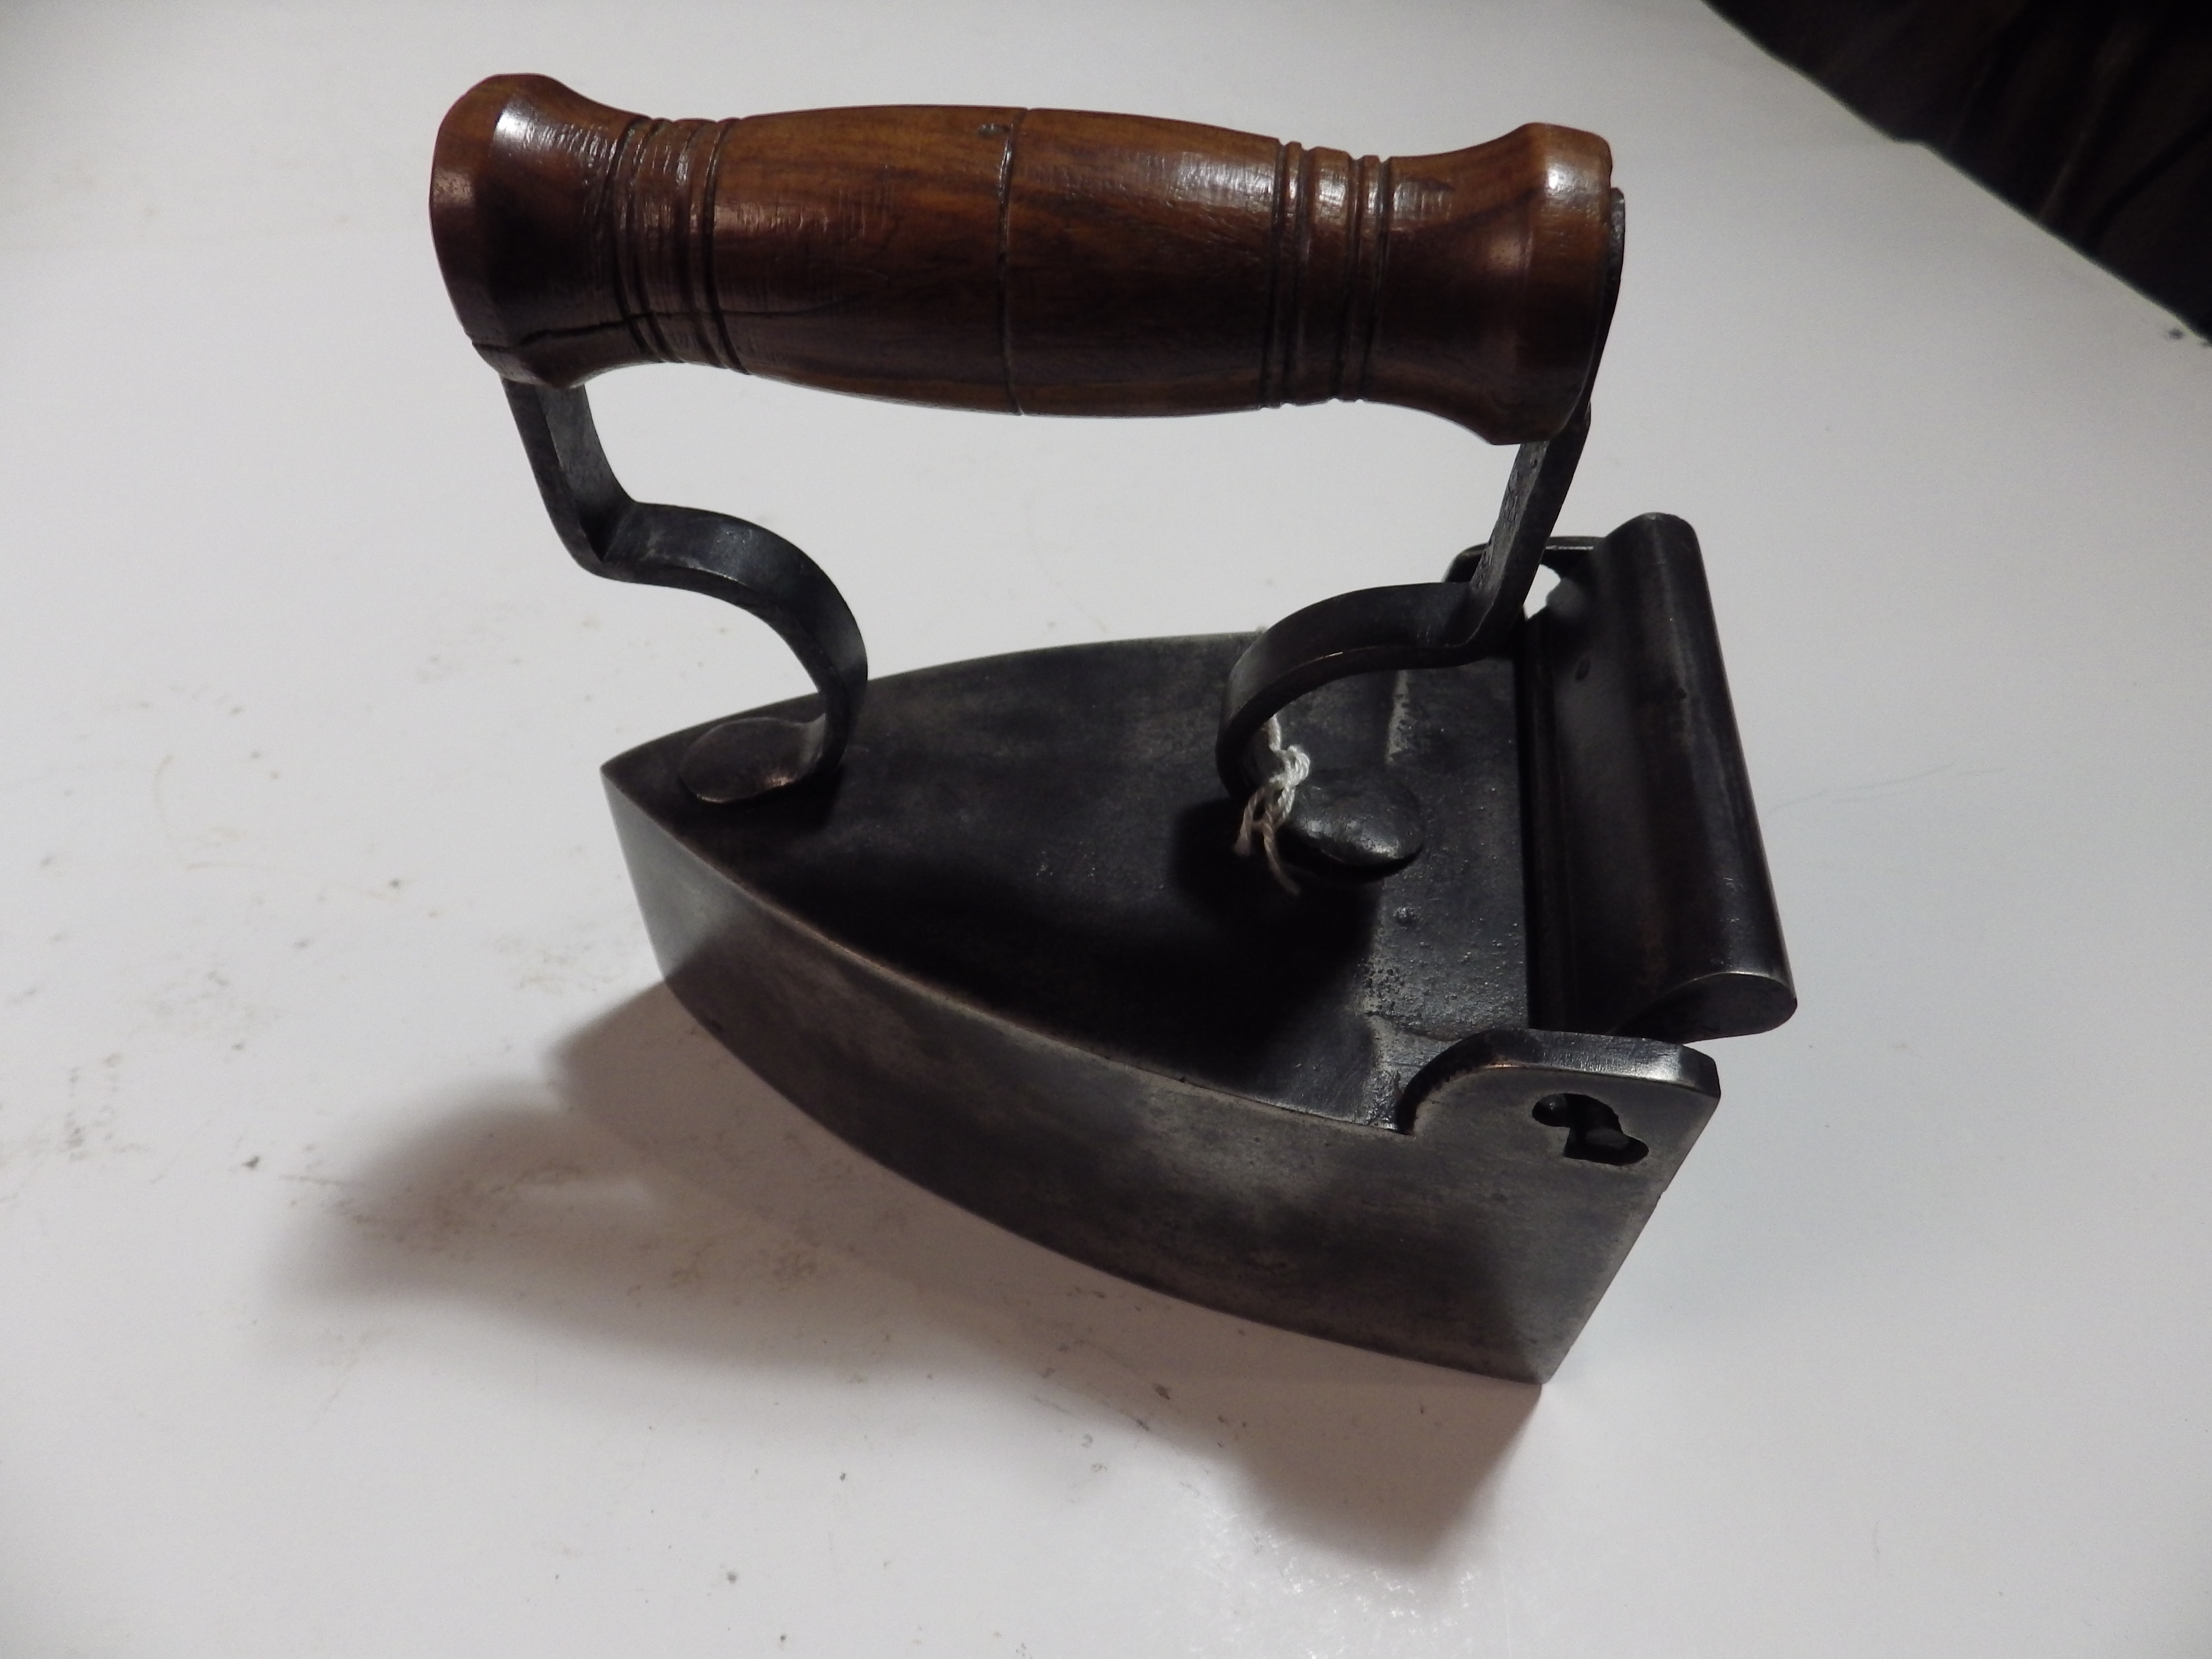 Up and over box iron with wooden handle Eve? & Rowlands patent automatic